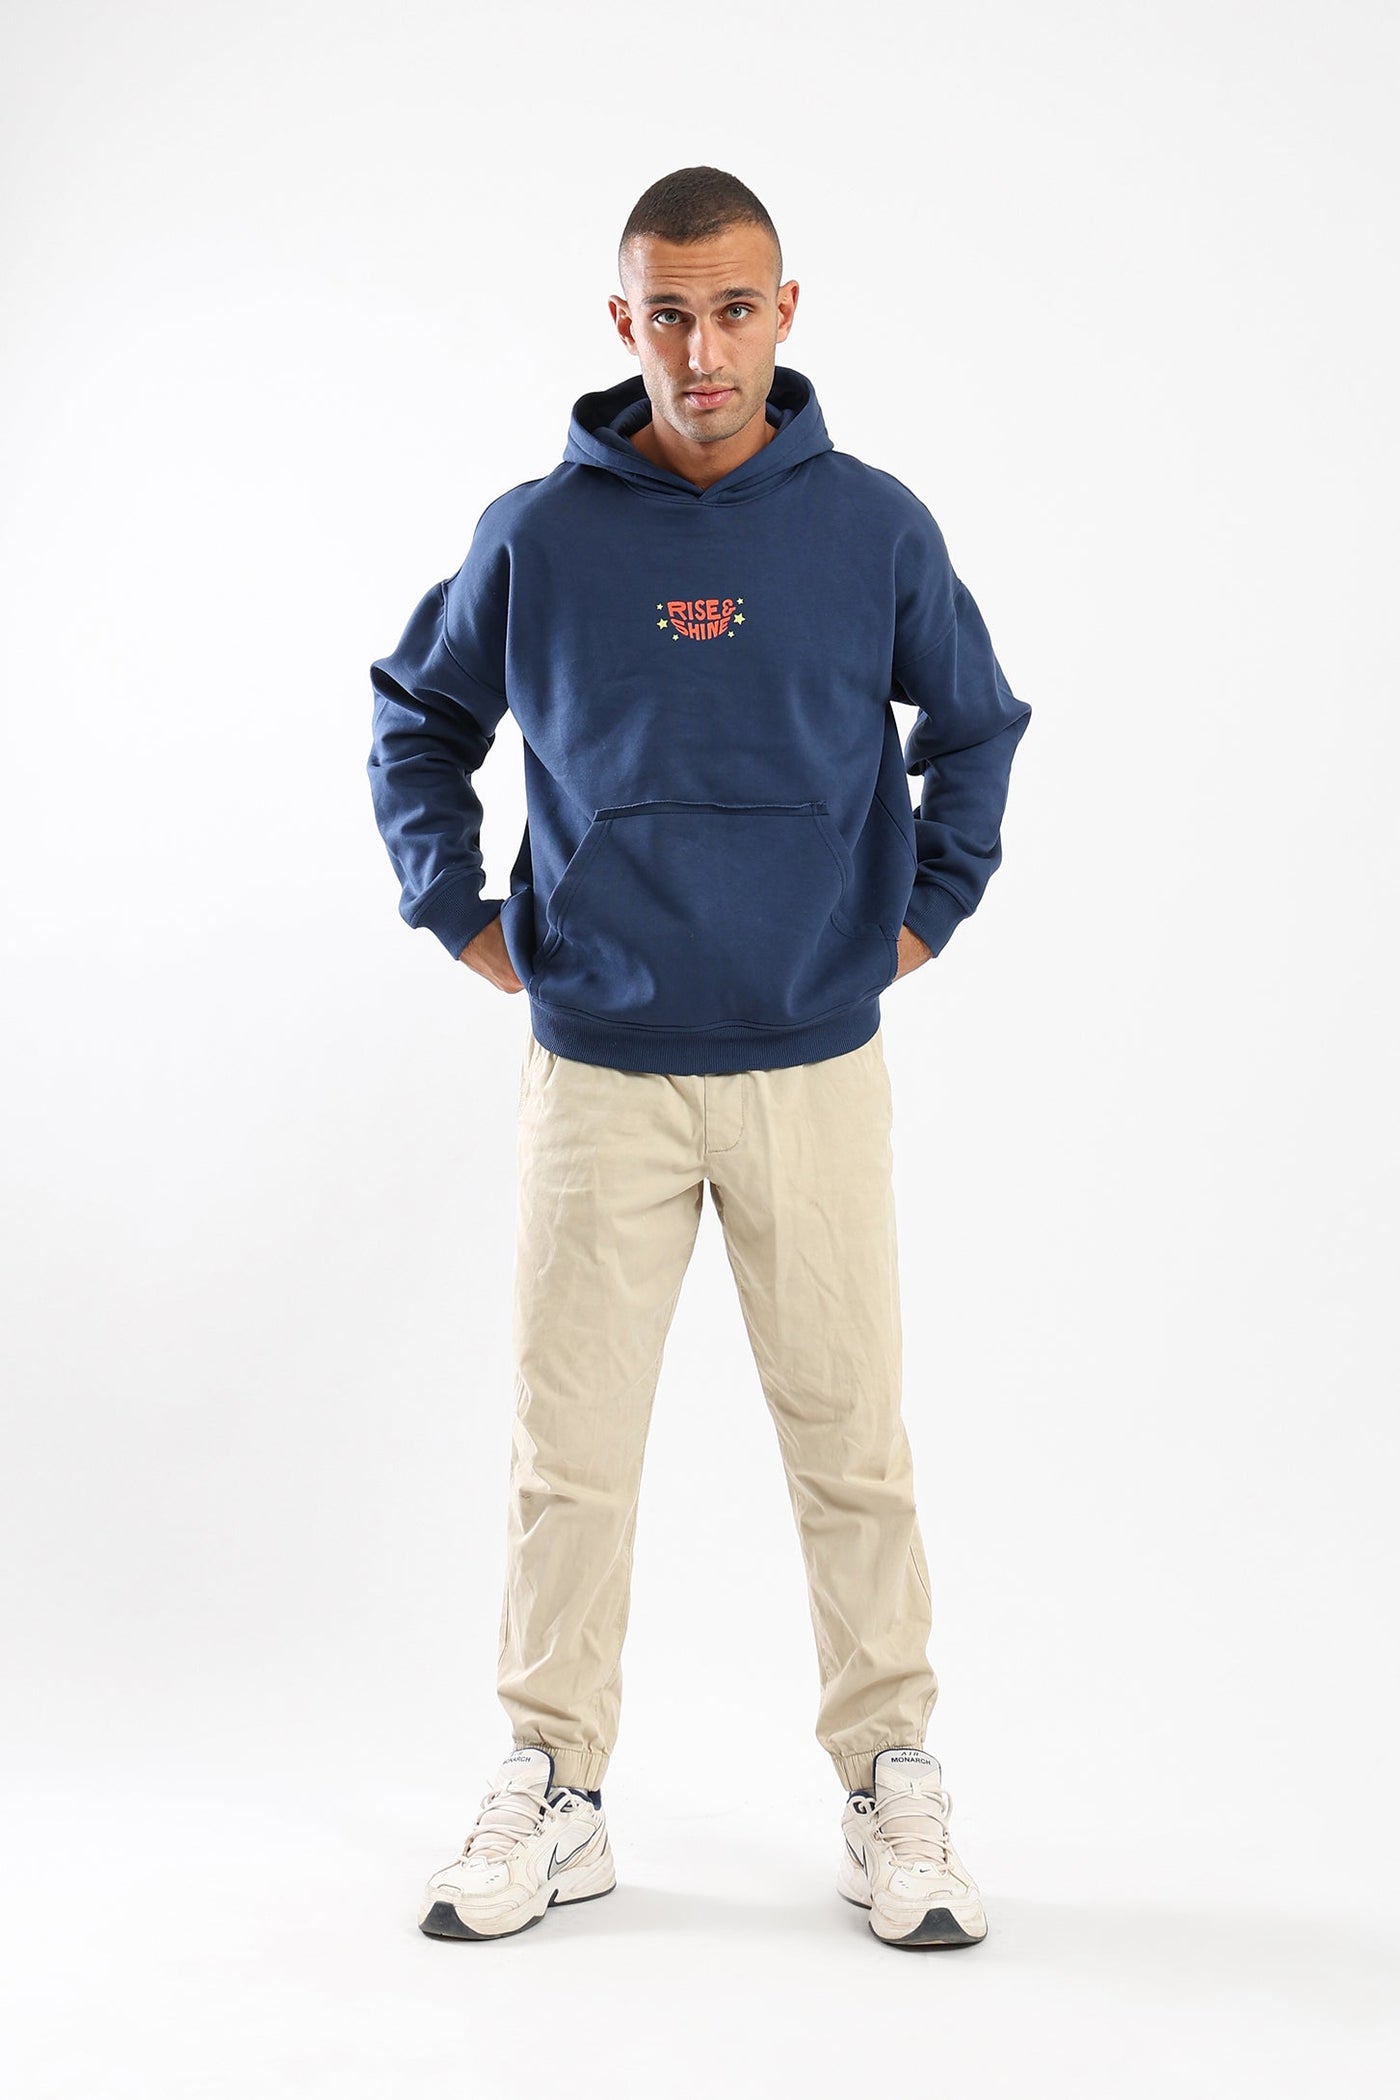 RISE AND SHINE HOODIE - NAVY